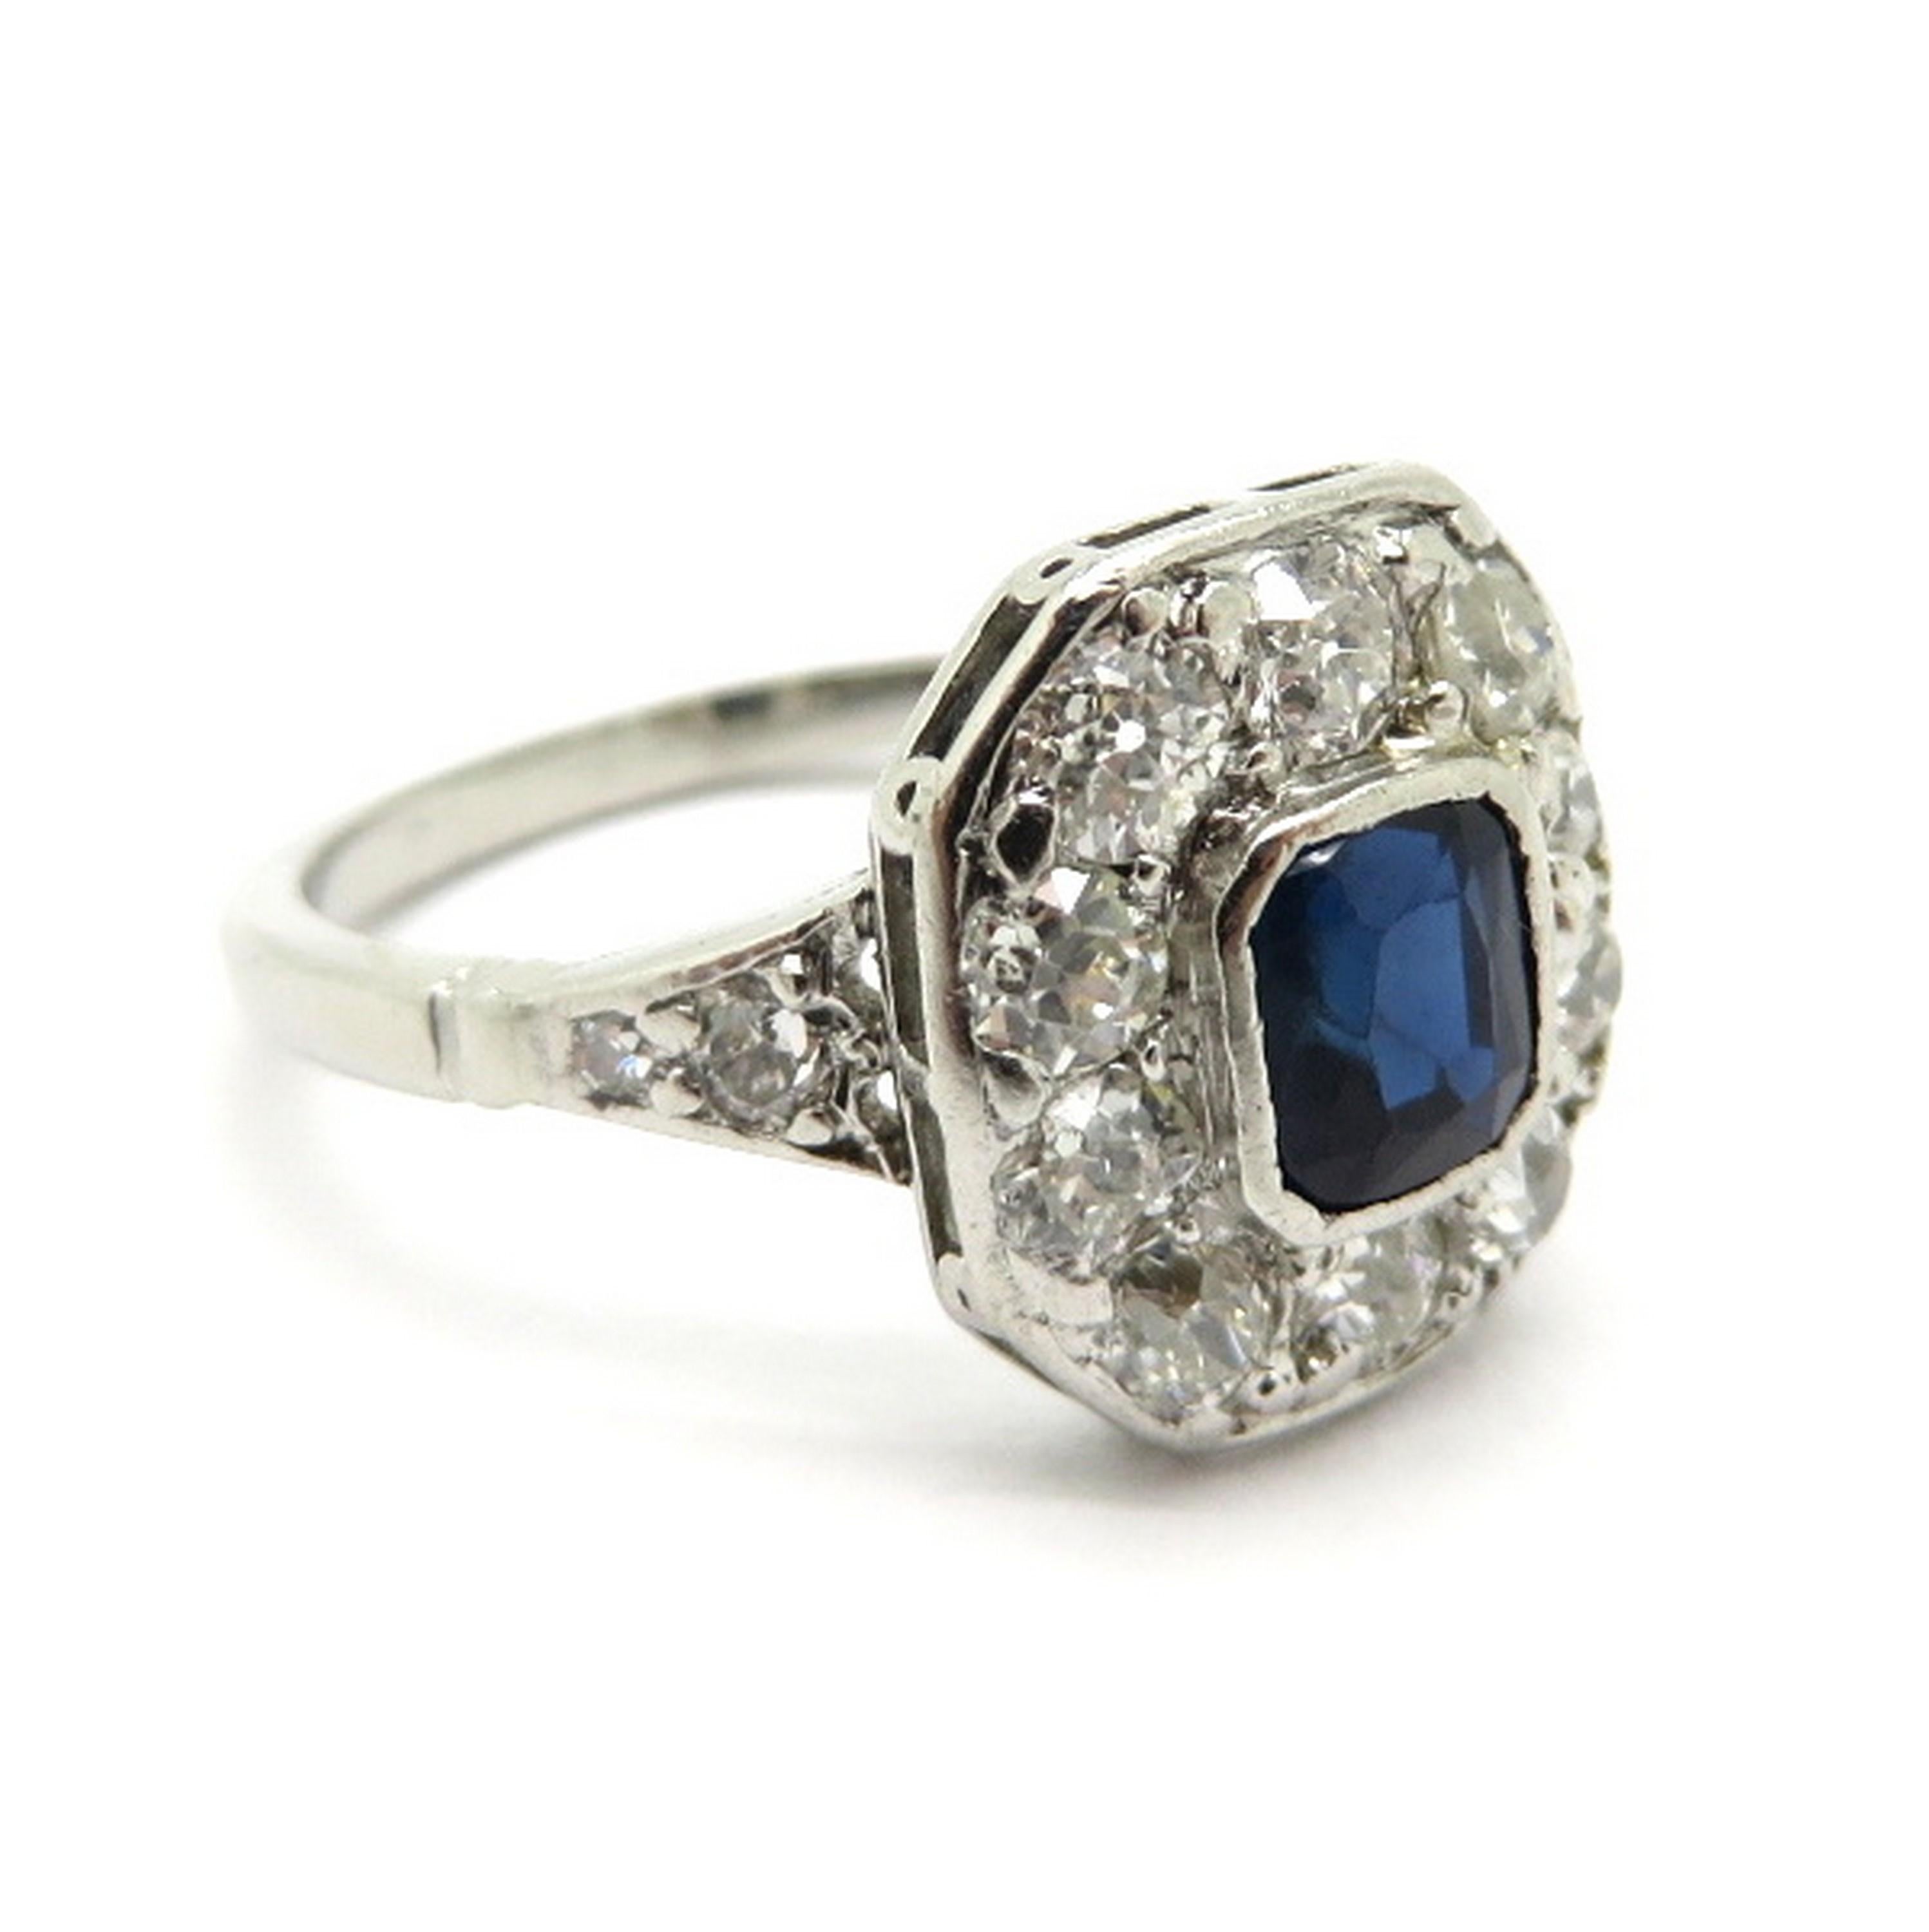 Platinum Art Deco Style Sapphire and Round Diamond Ring In Excellent Condition For Sale In Scottsdale, AZ